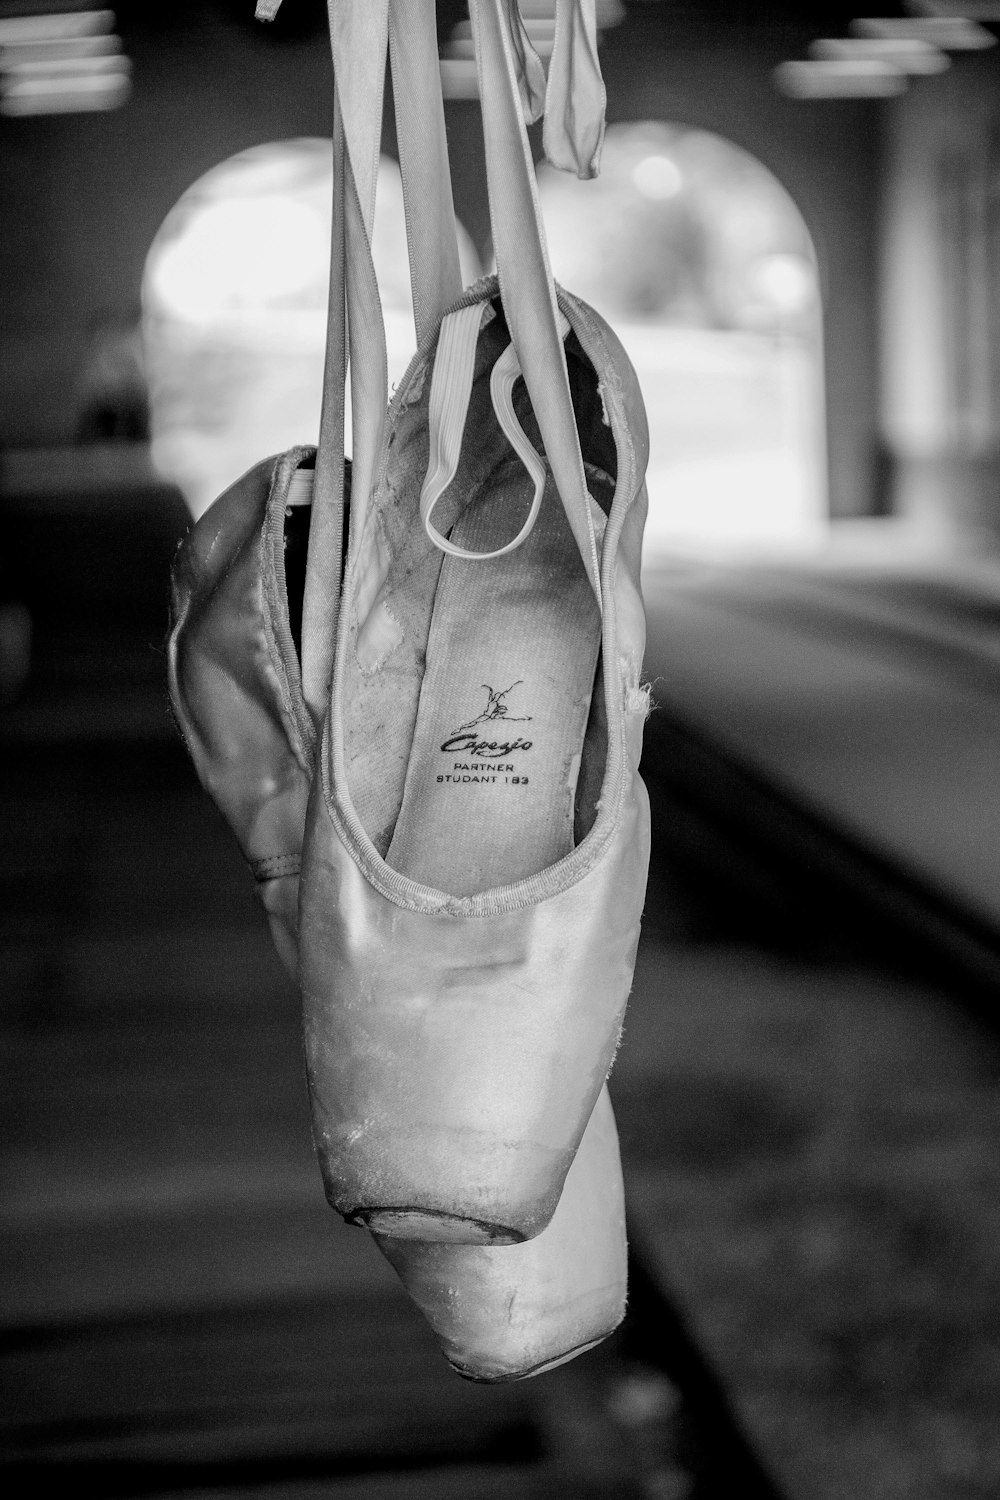 a pair of ballet shoes hanging from a line